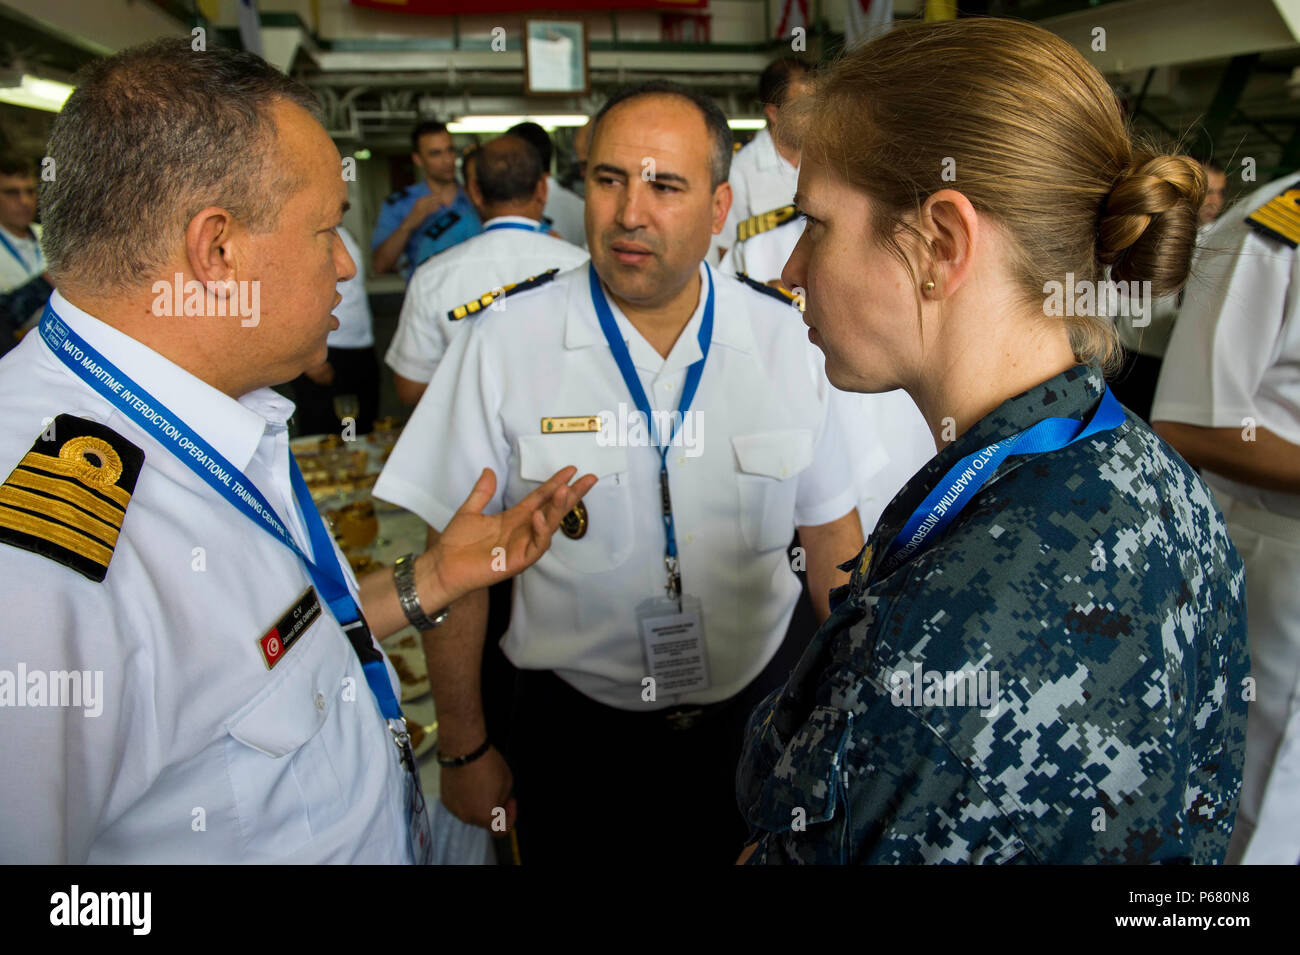 160520-N-AX546-100 SOUDA BAY, Greece (May 20, 2016) Lt. Cmdr. Kelleigh Cunningham, from Fryburg, Pennsylvania speaks with Moroccan Naval officers aboard the Moroccan Frigate Mohammed V, during a partner engagement, May 20. Phoenix Express is a U.S Africa Command-sponsored multinational maritime exercise designed to increase maritime safety and security in the Mediterranean. (U.S. Navy photo by Mass Communication Specialist 1st Class Sean Spratt/Released) Stock Photo